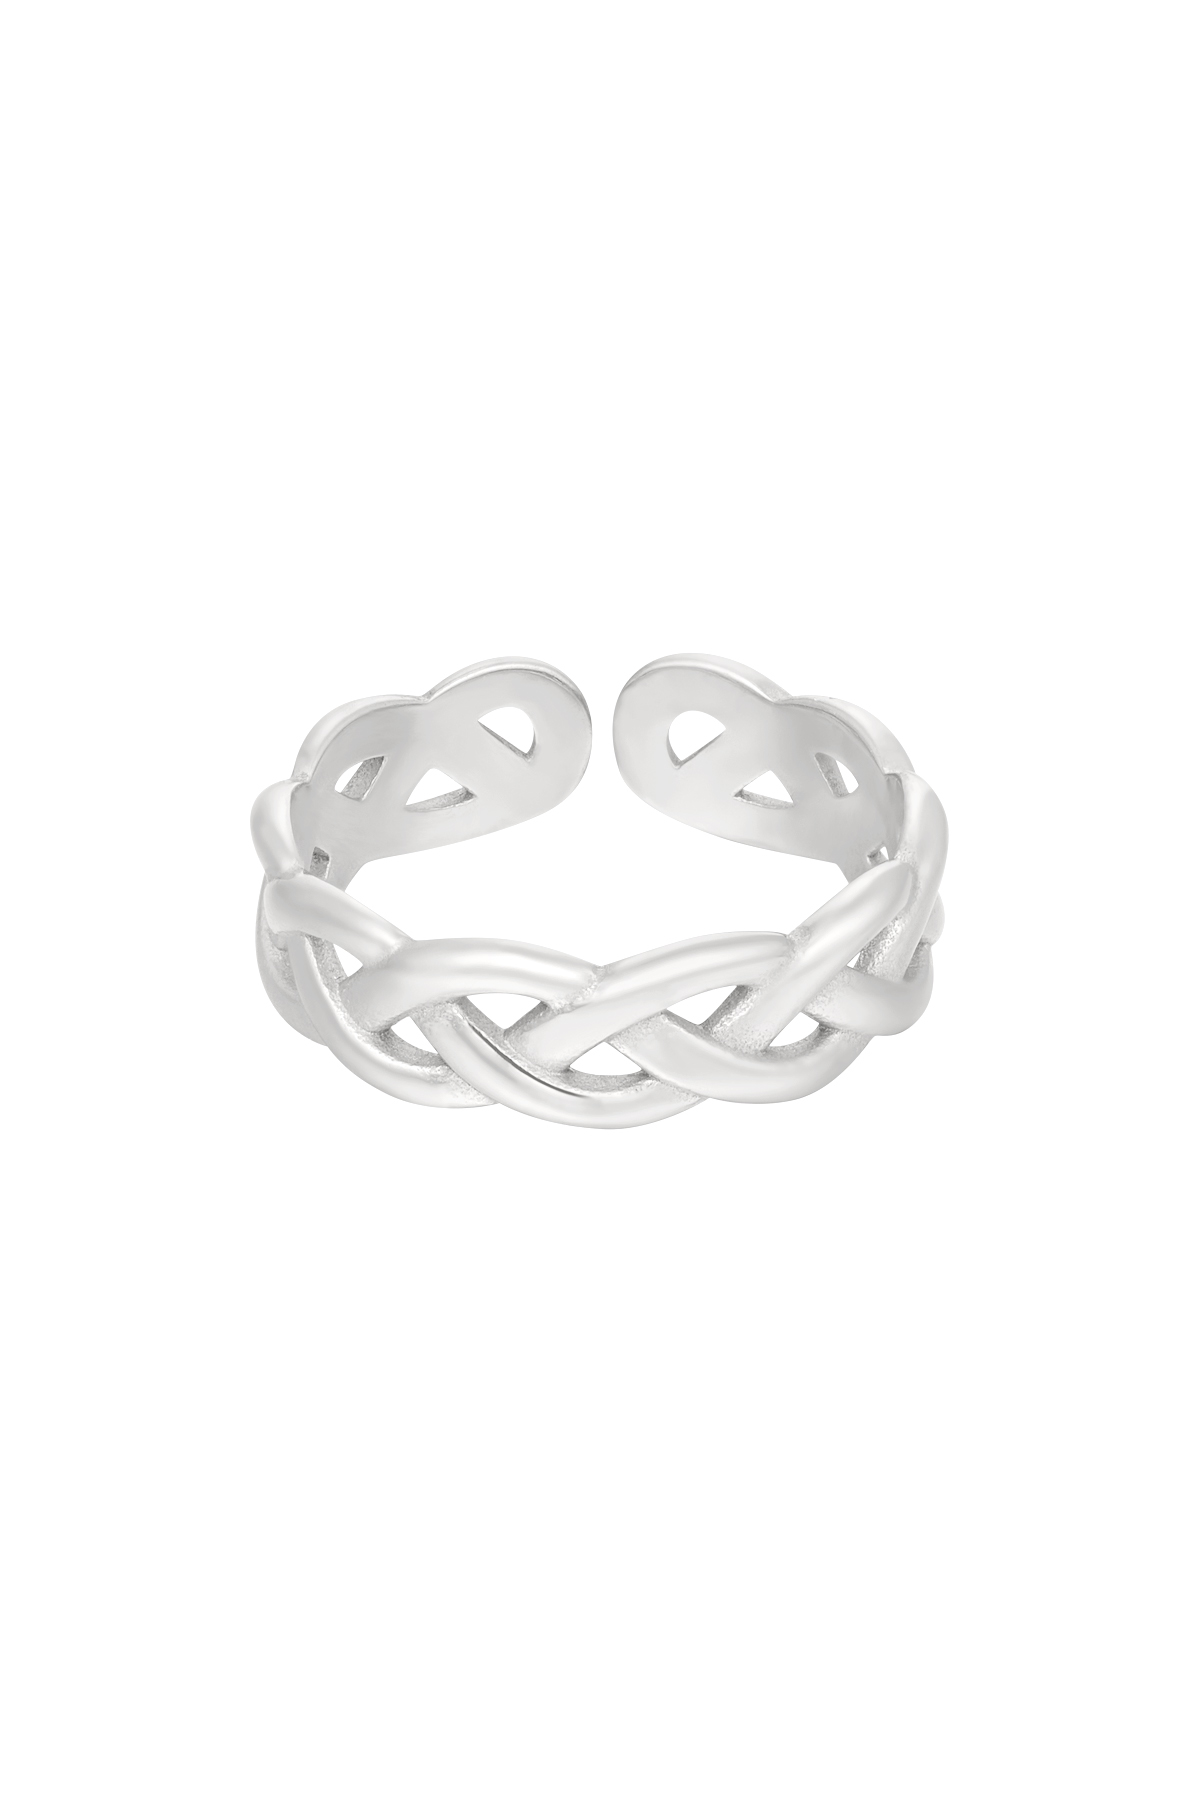 Ring braided - silver h5 